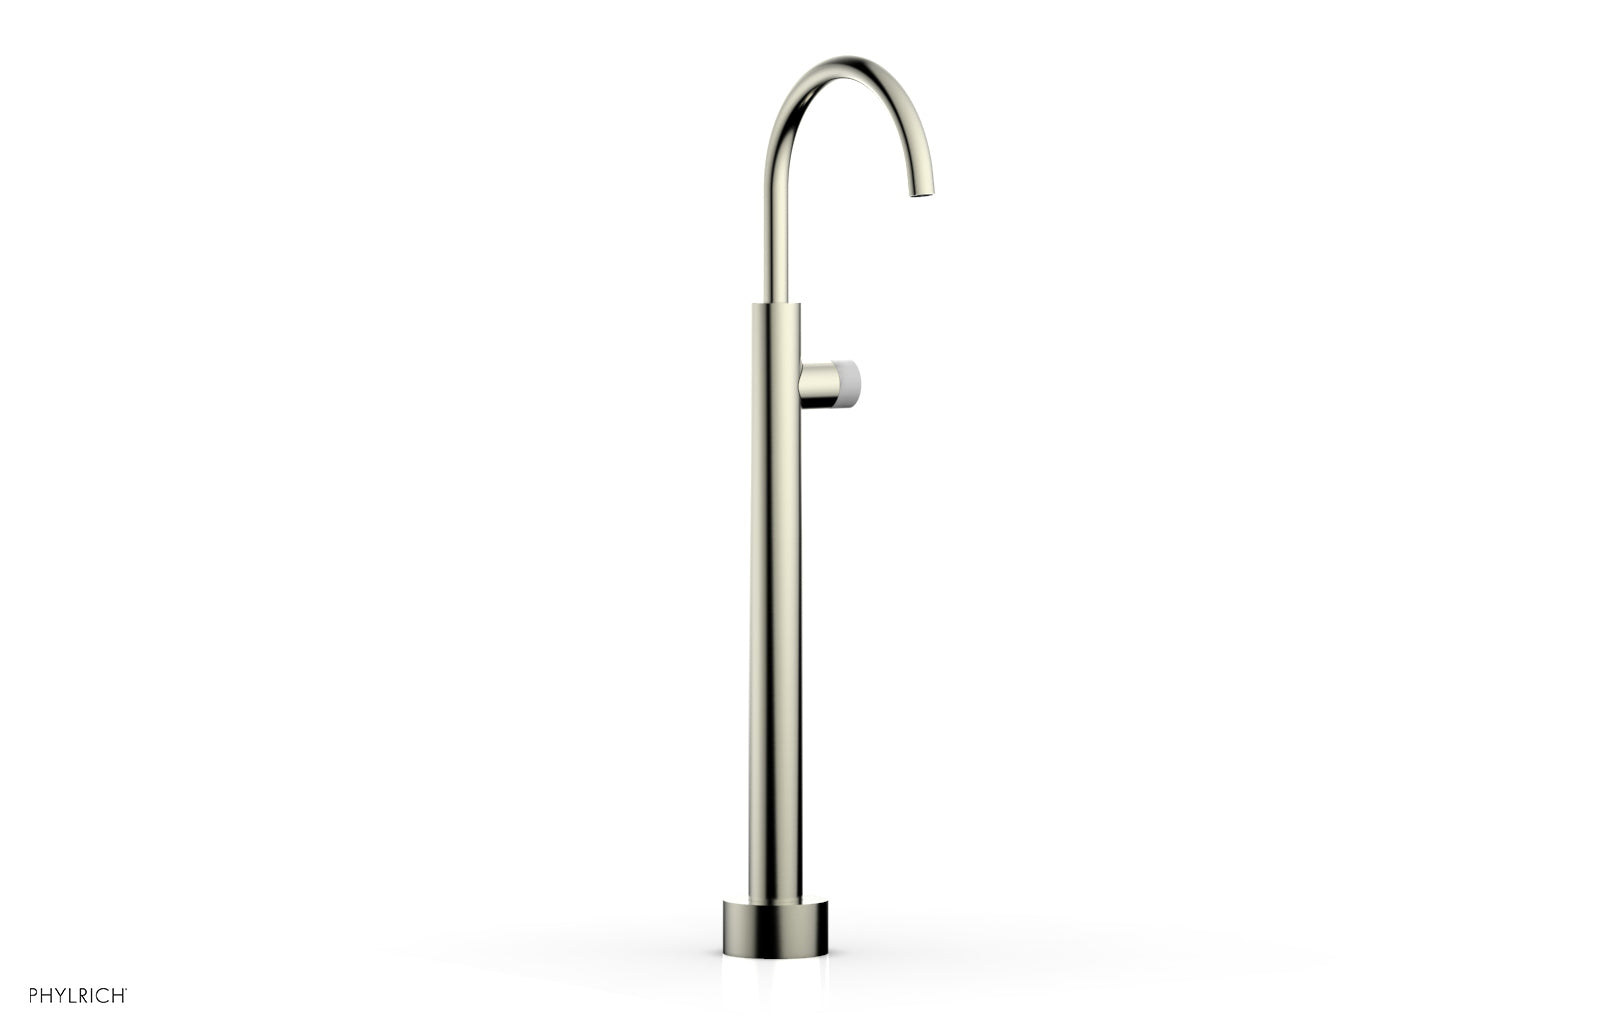 Phylrich BASIC II Low Floor Mount Tub Filler - Marble Handle